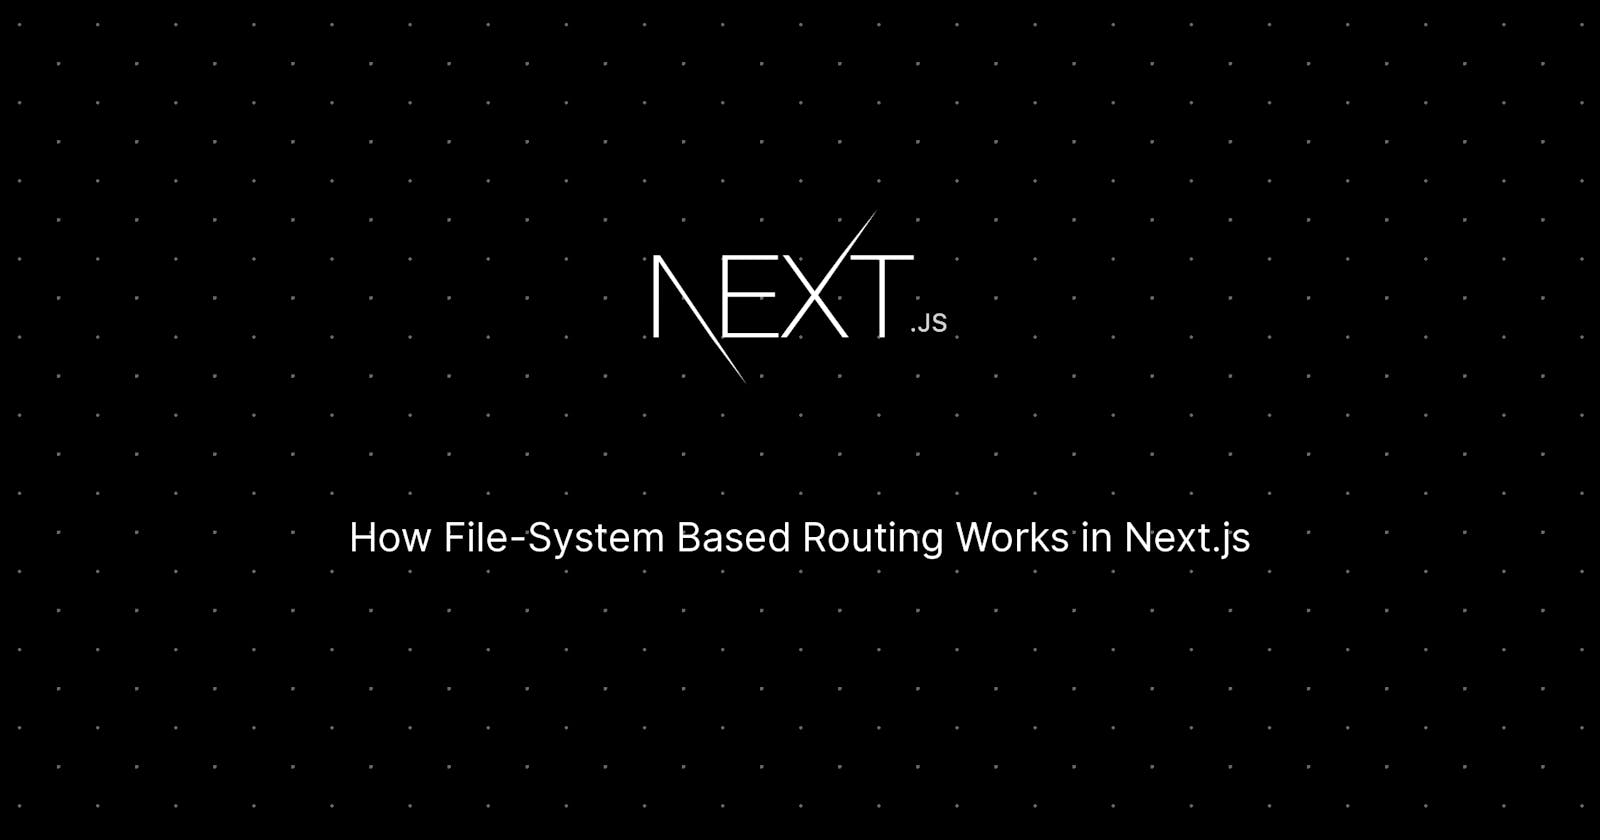 How File-System Based Routing Works in Next.js